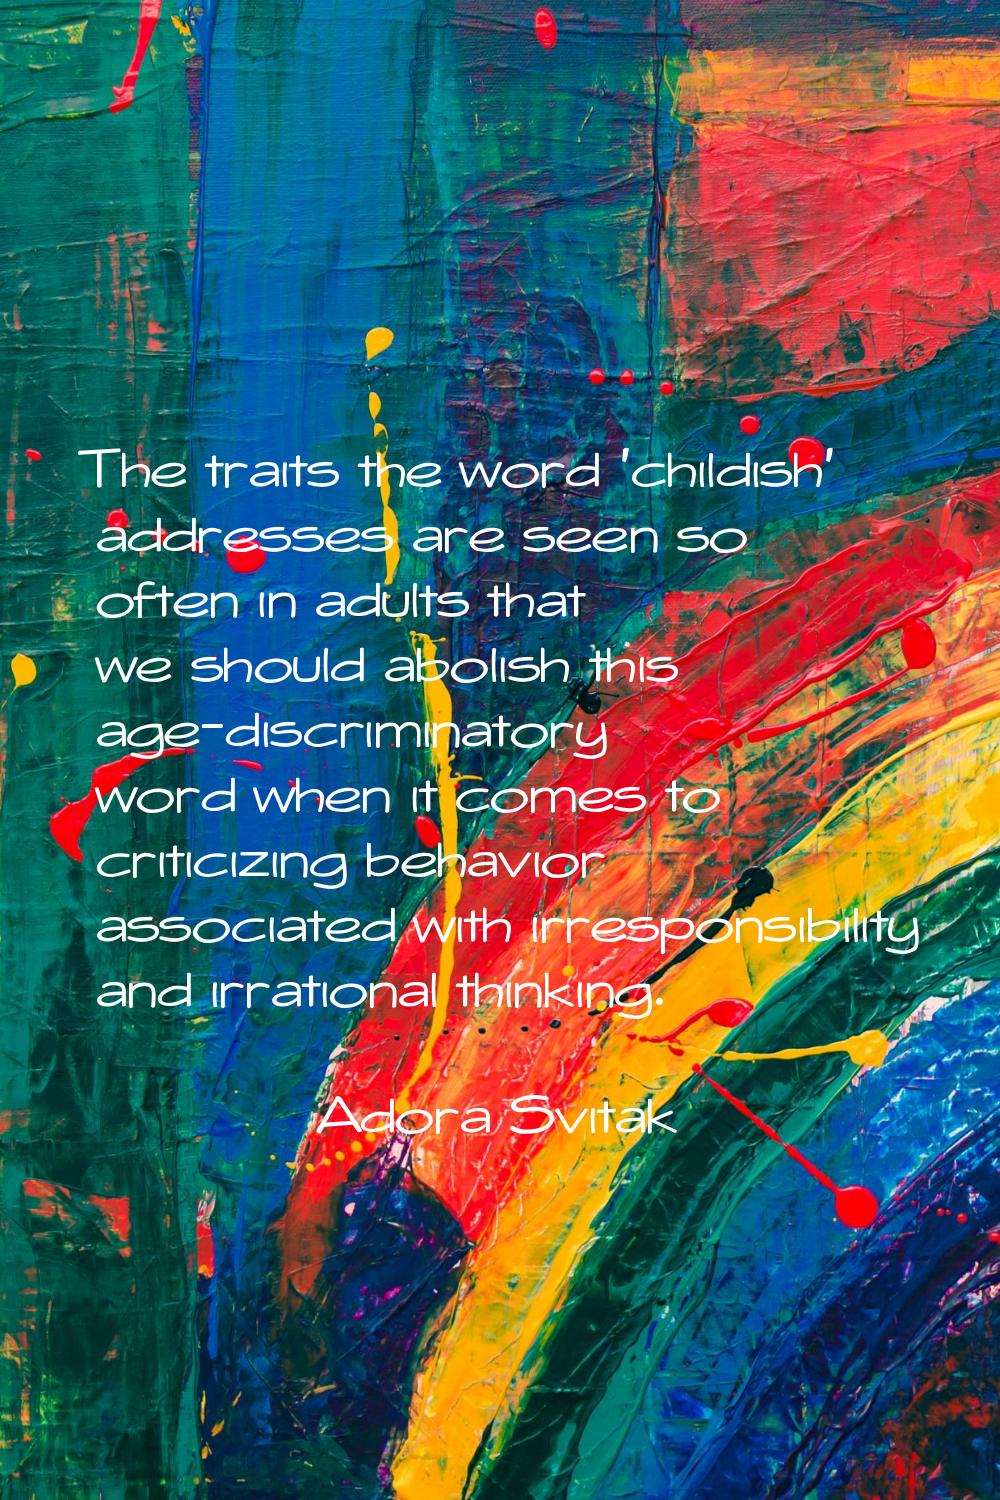 The traits the word 'childish' addresses are seen so often in adults that we should abolish this ag